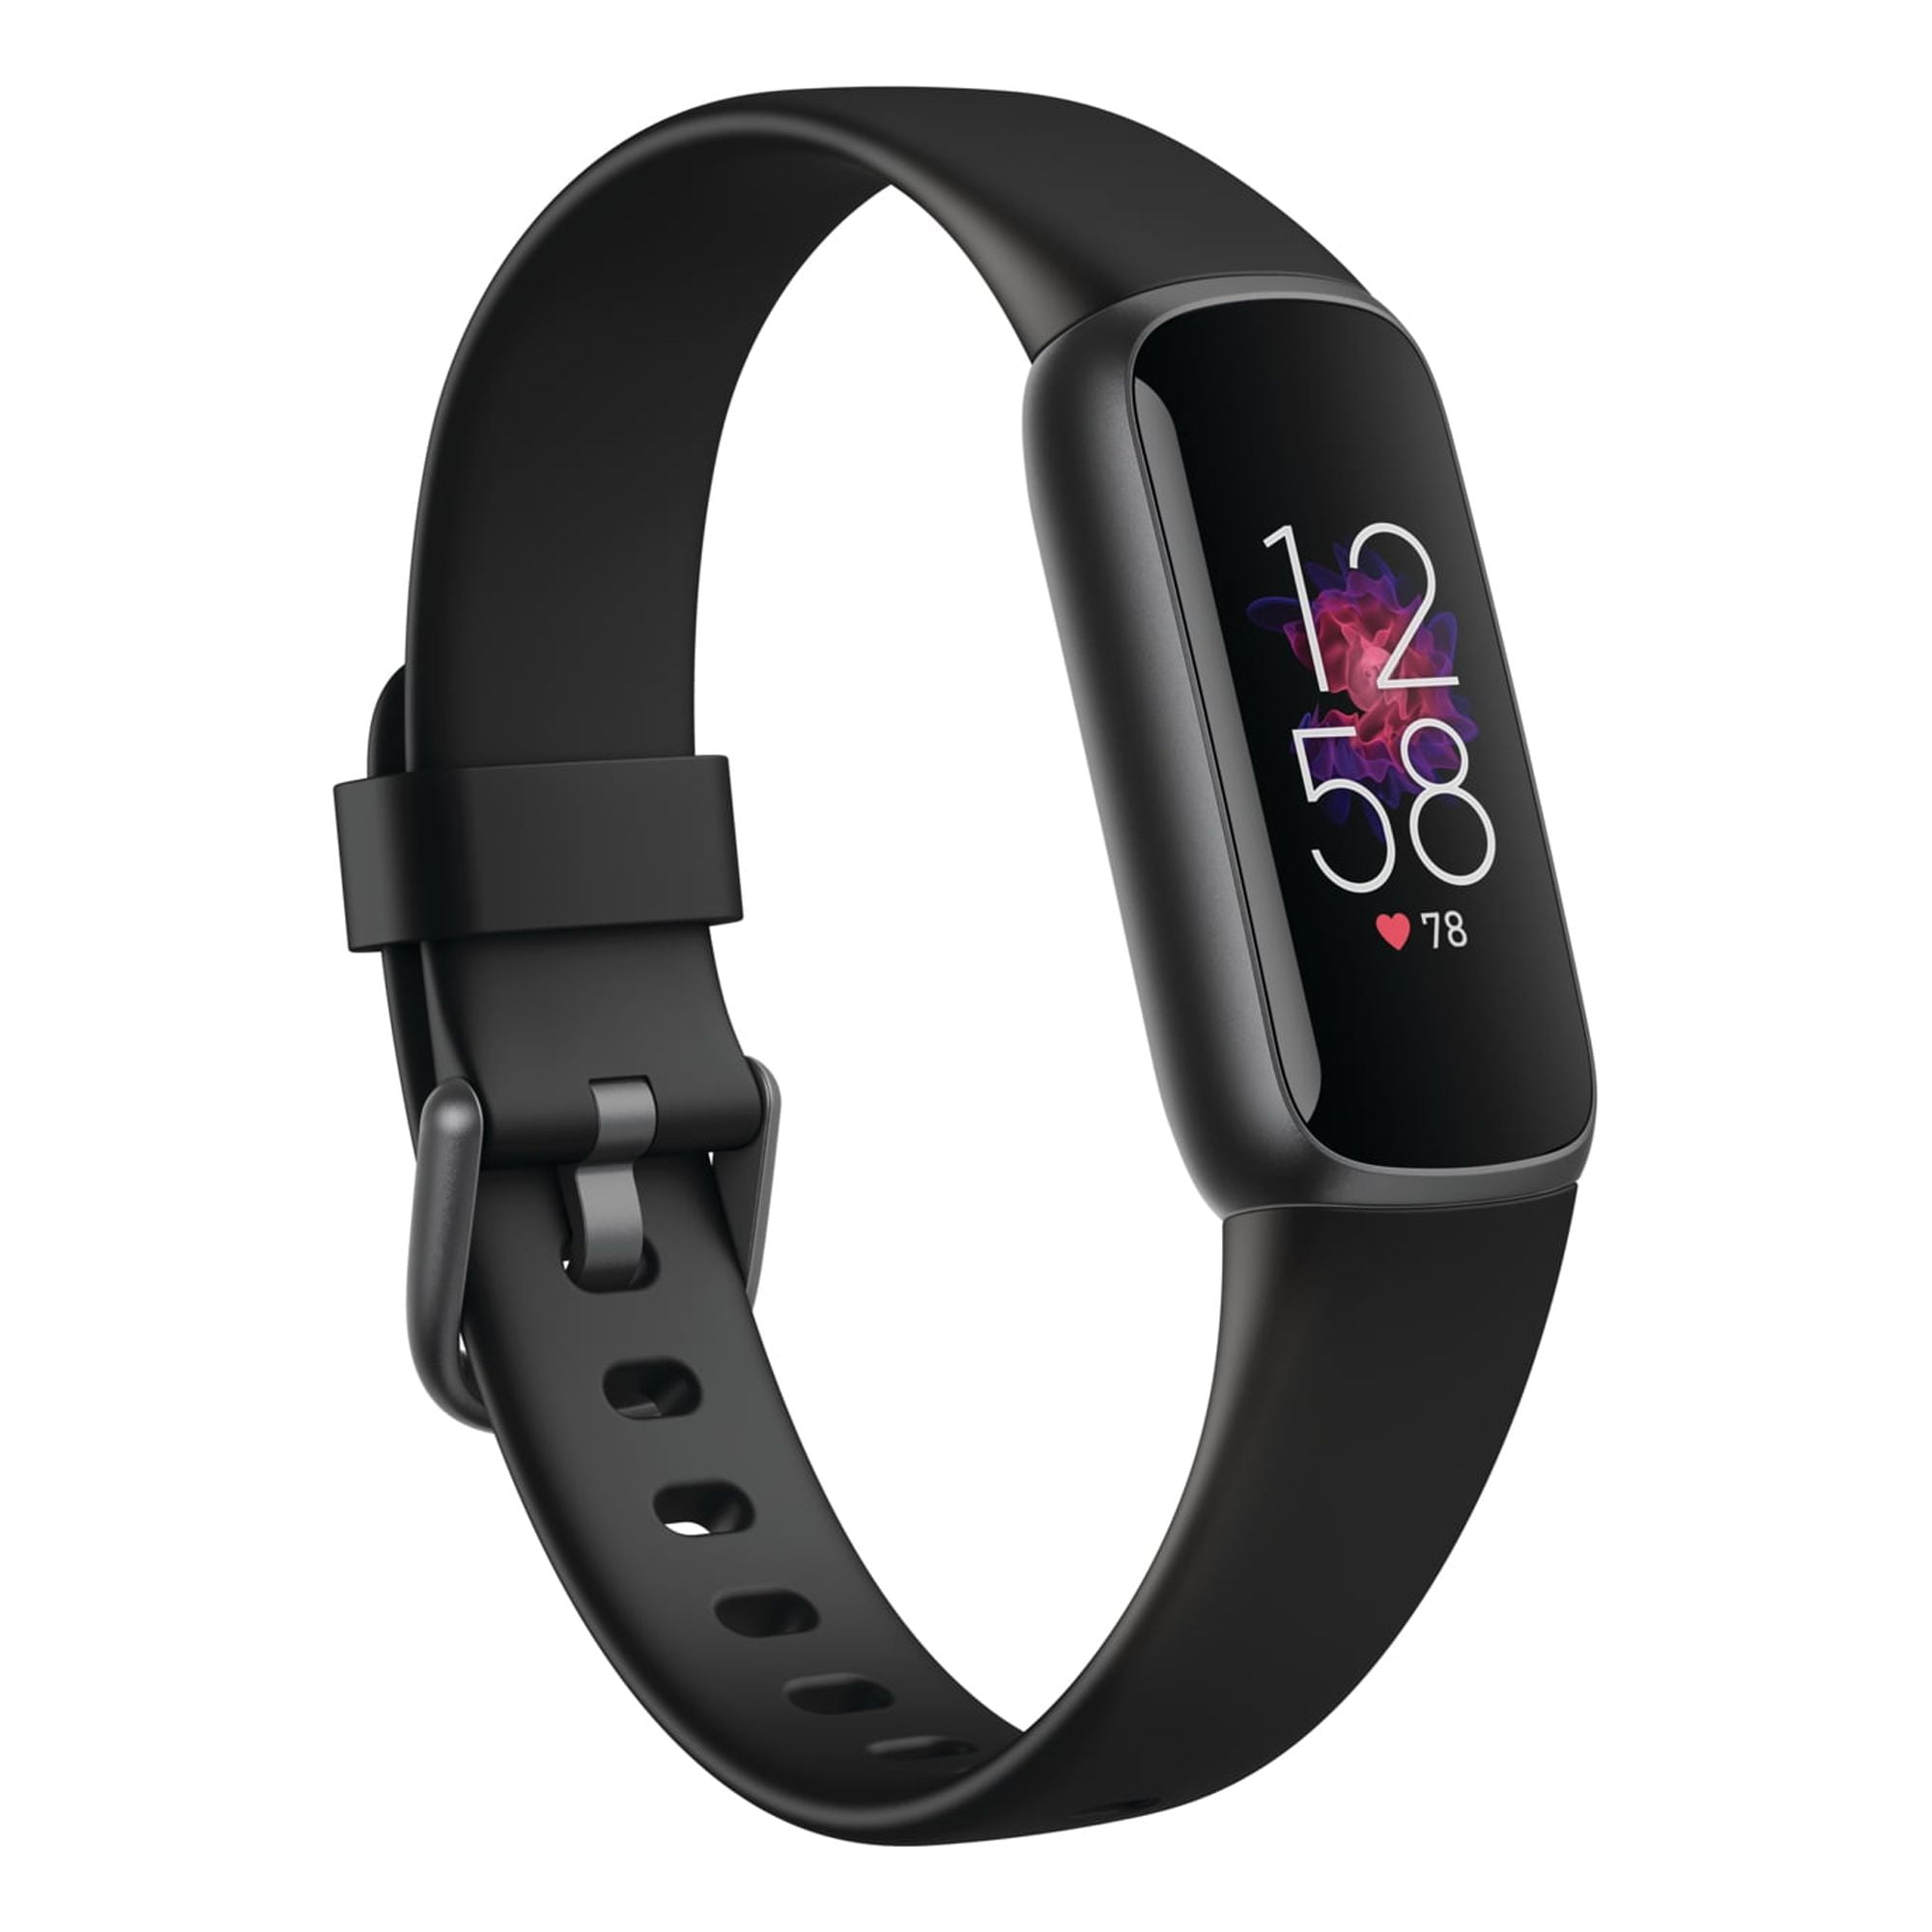 Fitbit Luxe Fitness Tracker in Black/Stainless Steel